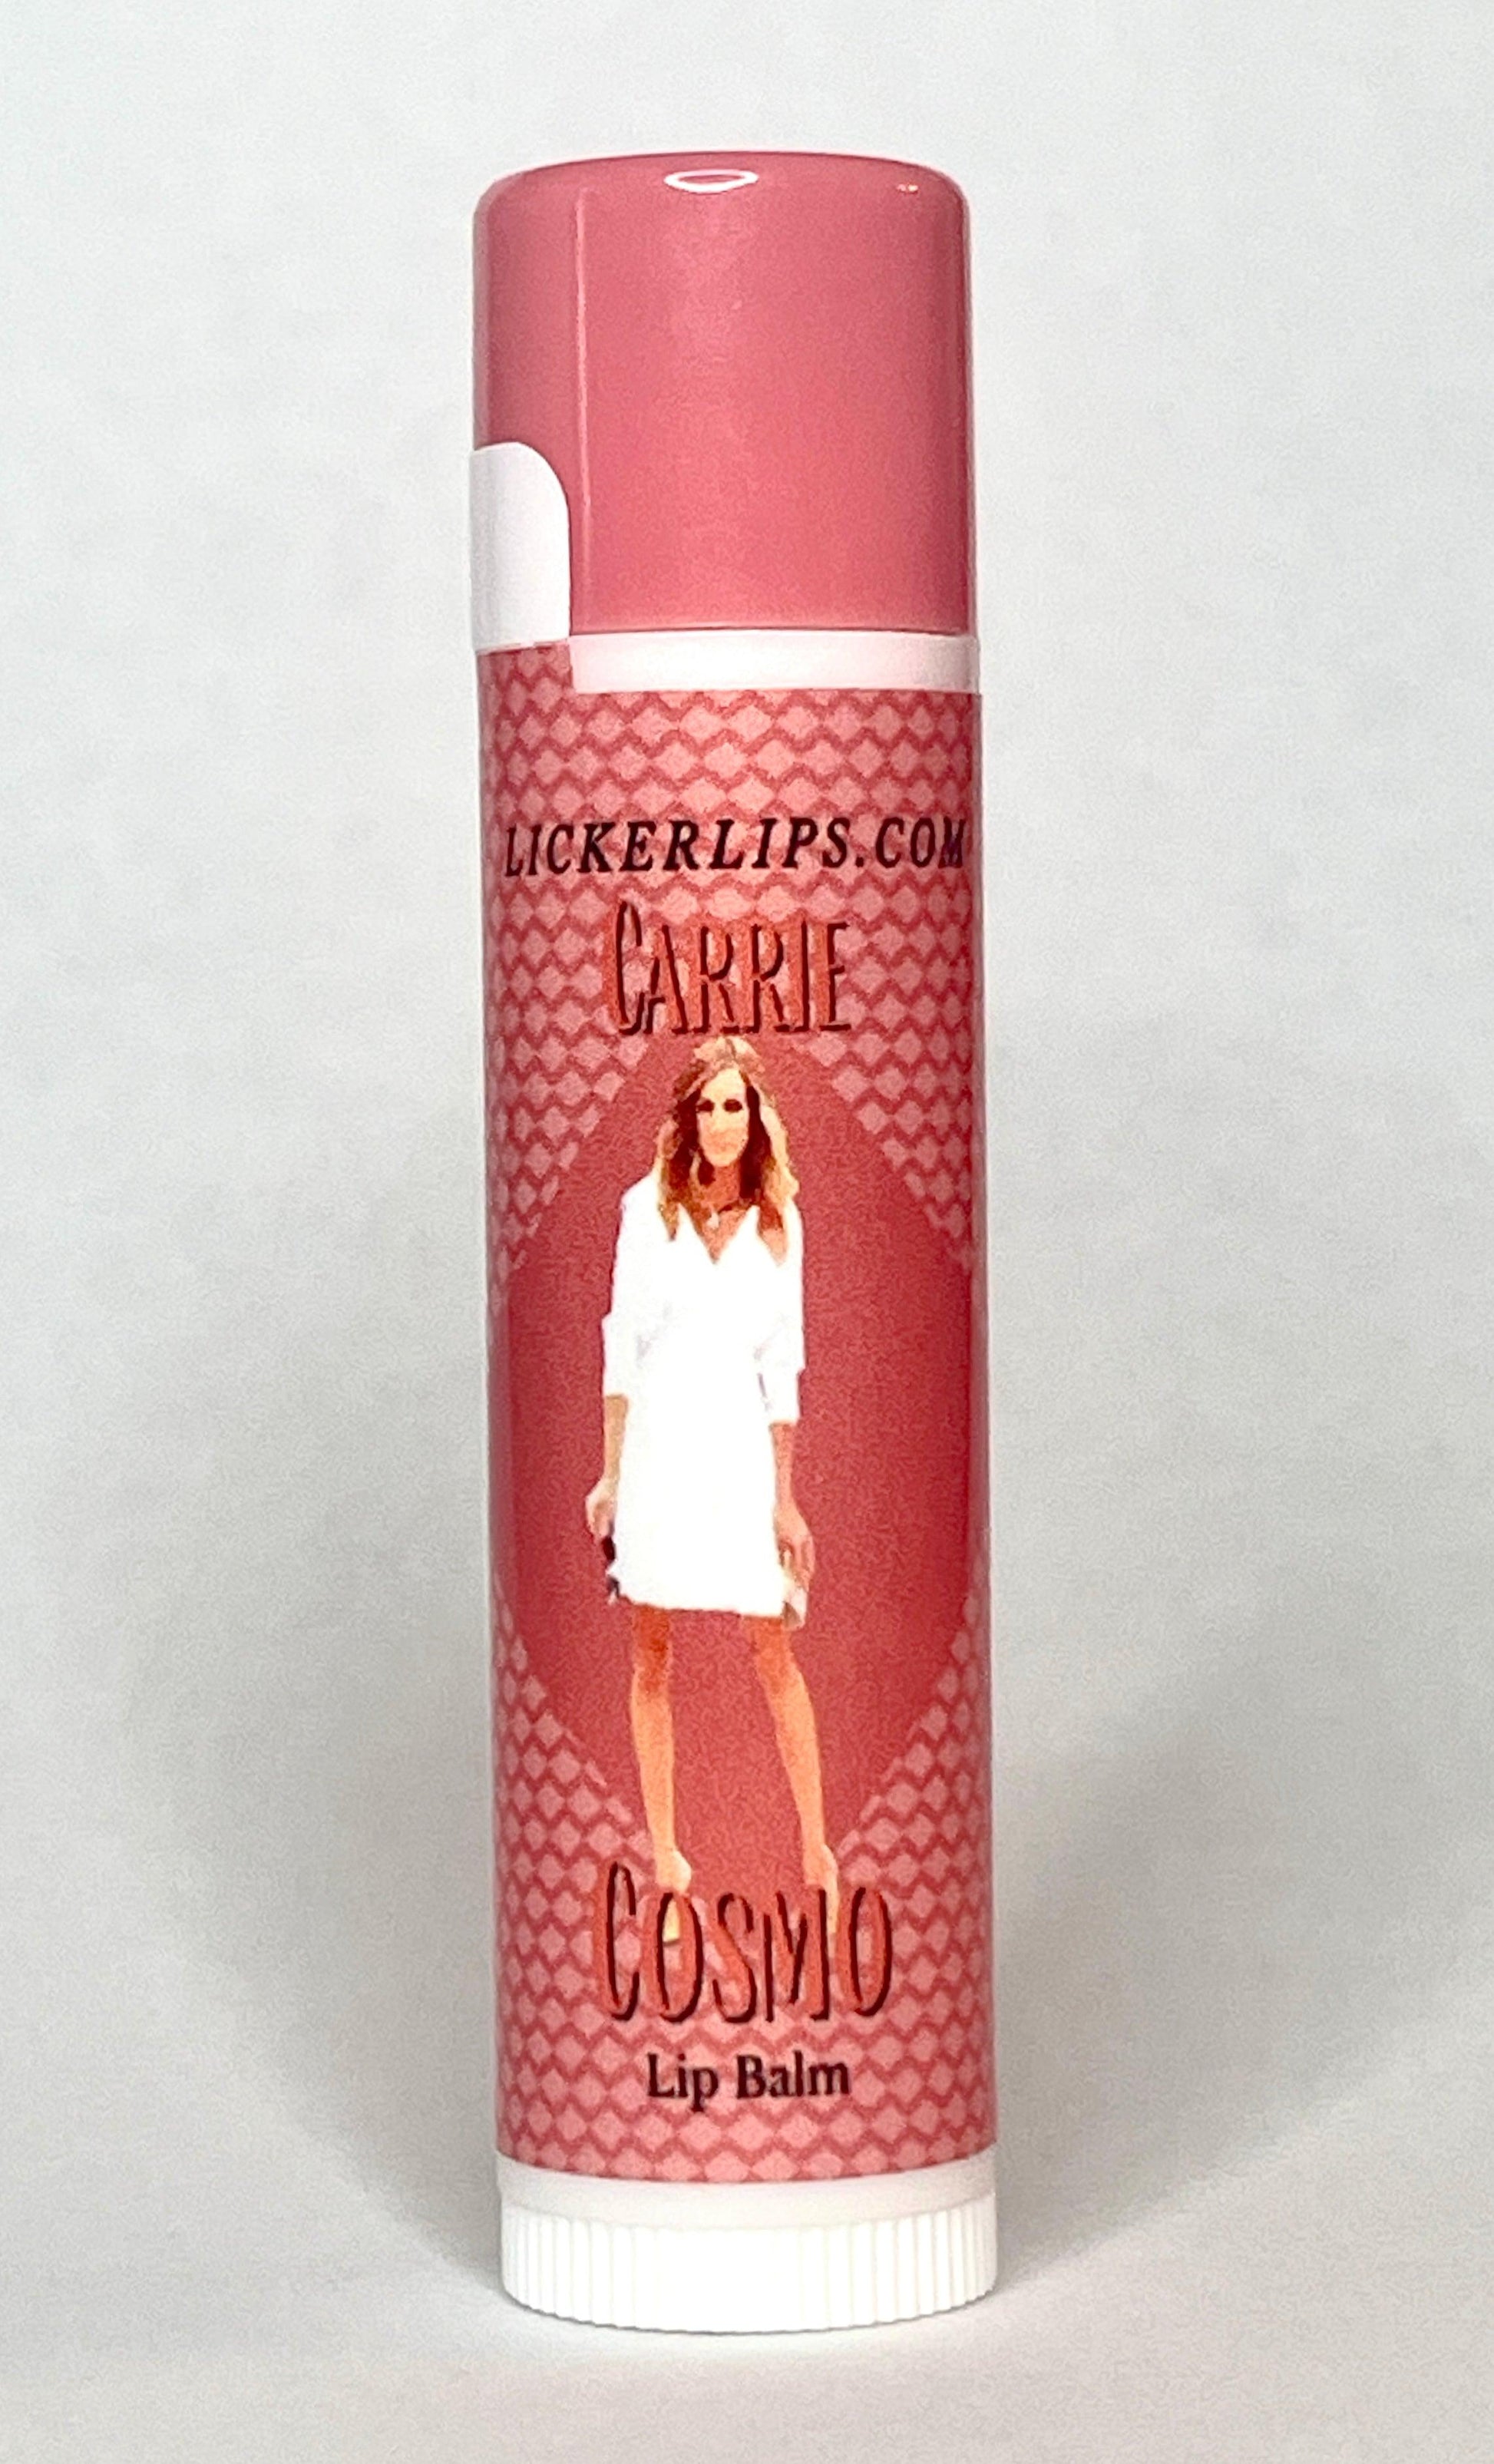 Sex and the City Lip Balm Collection - Lickerlips Lip Balms